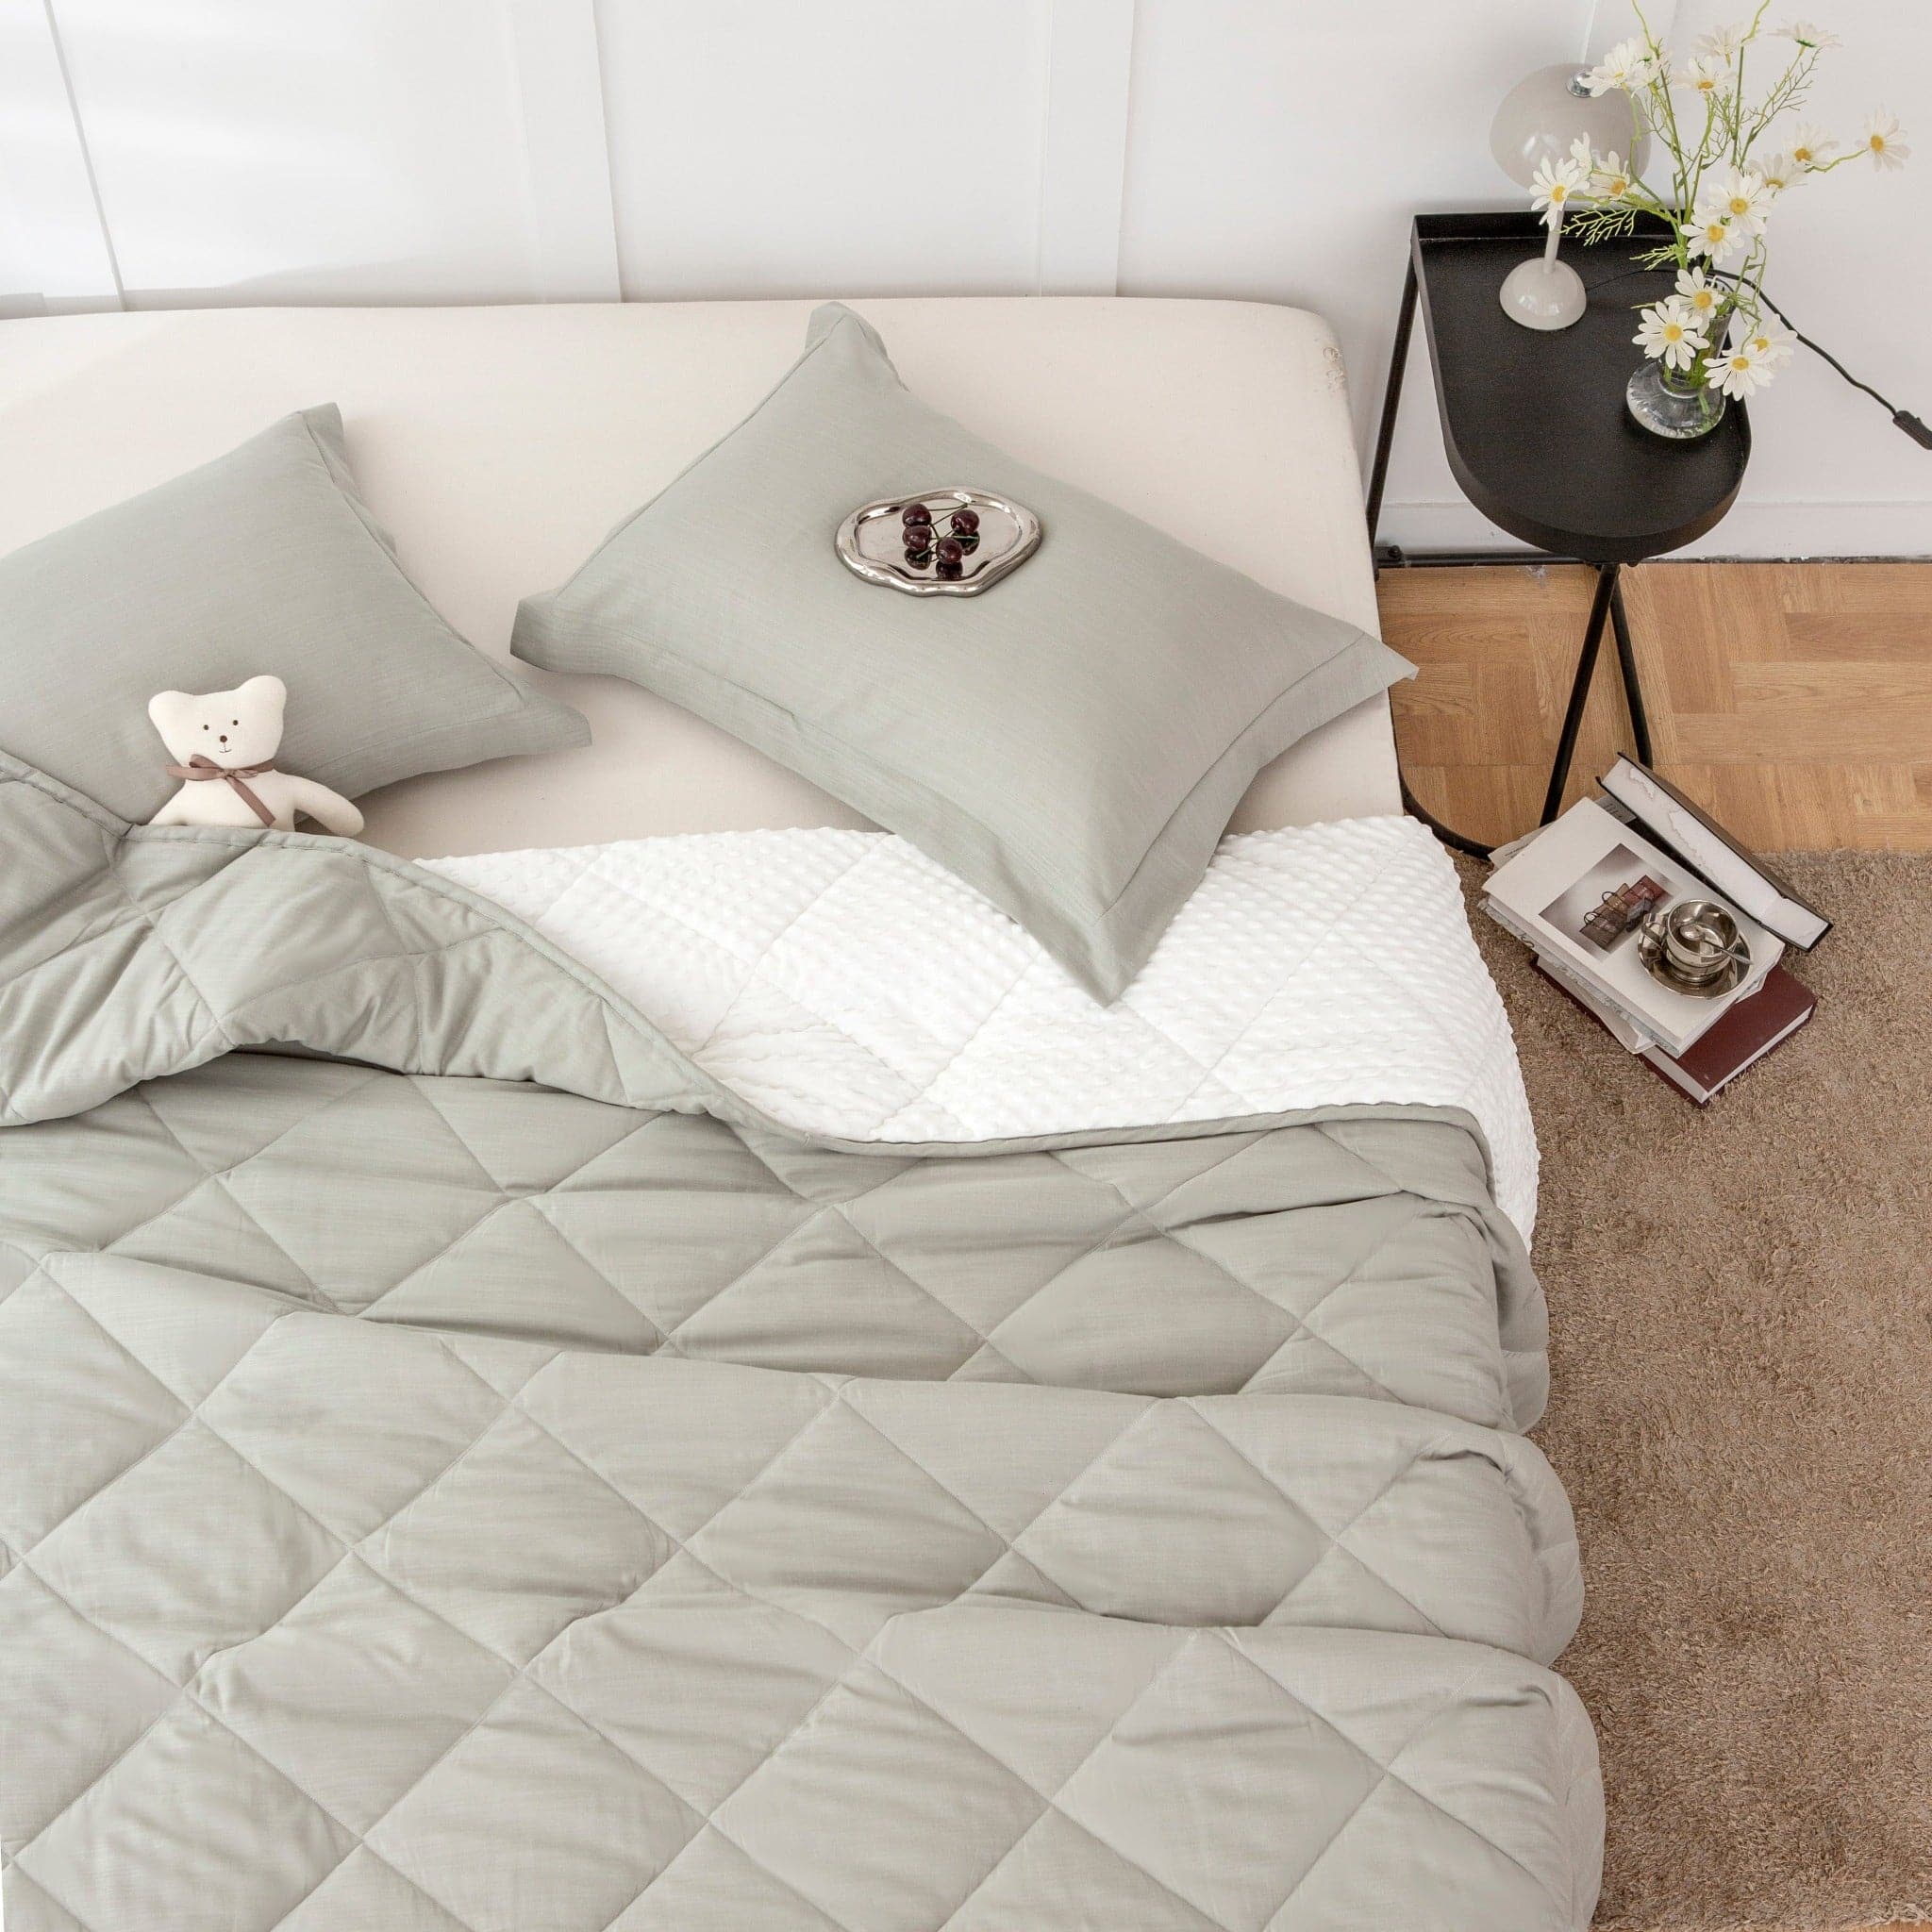 Quilted Grey Comforter and Pillows